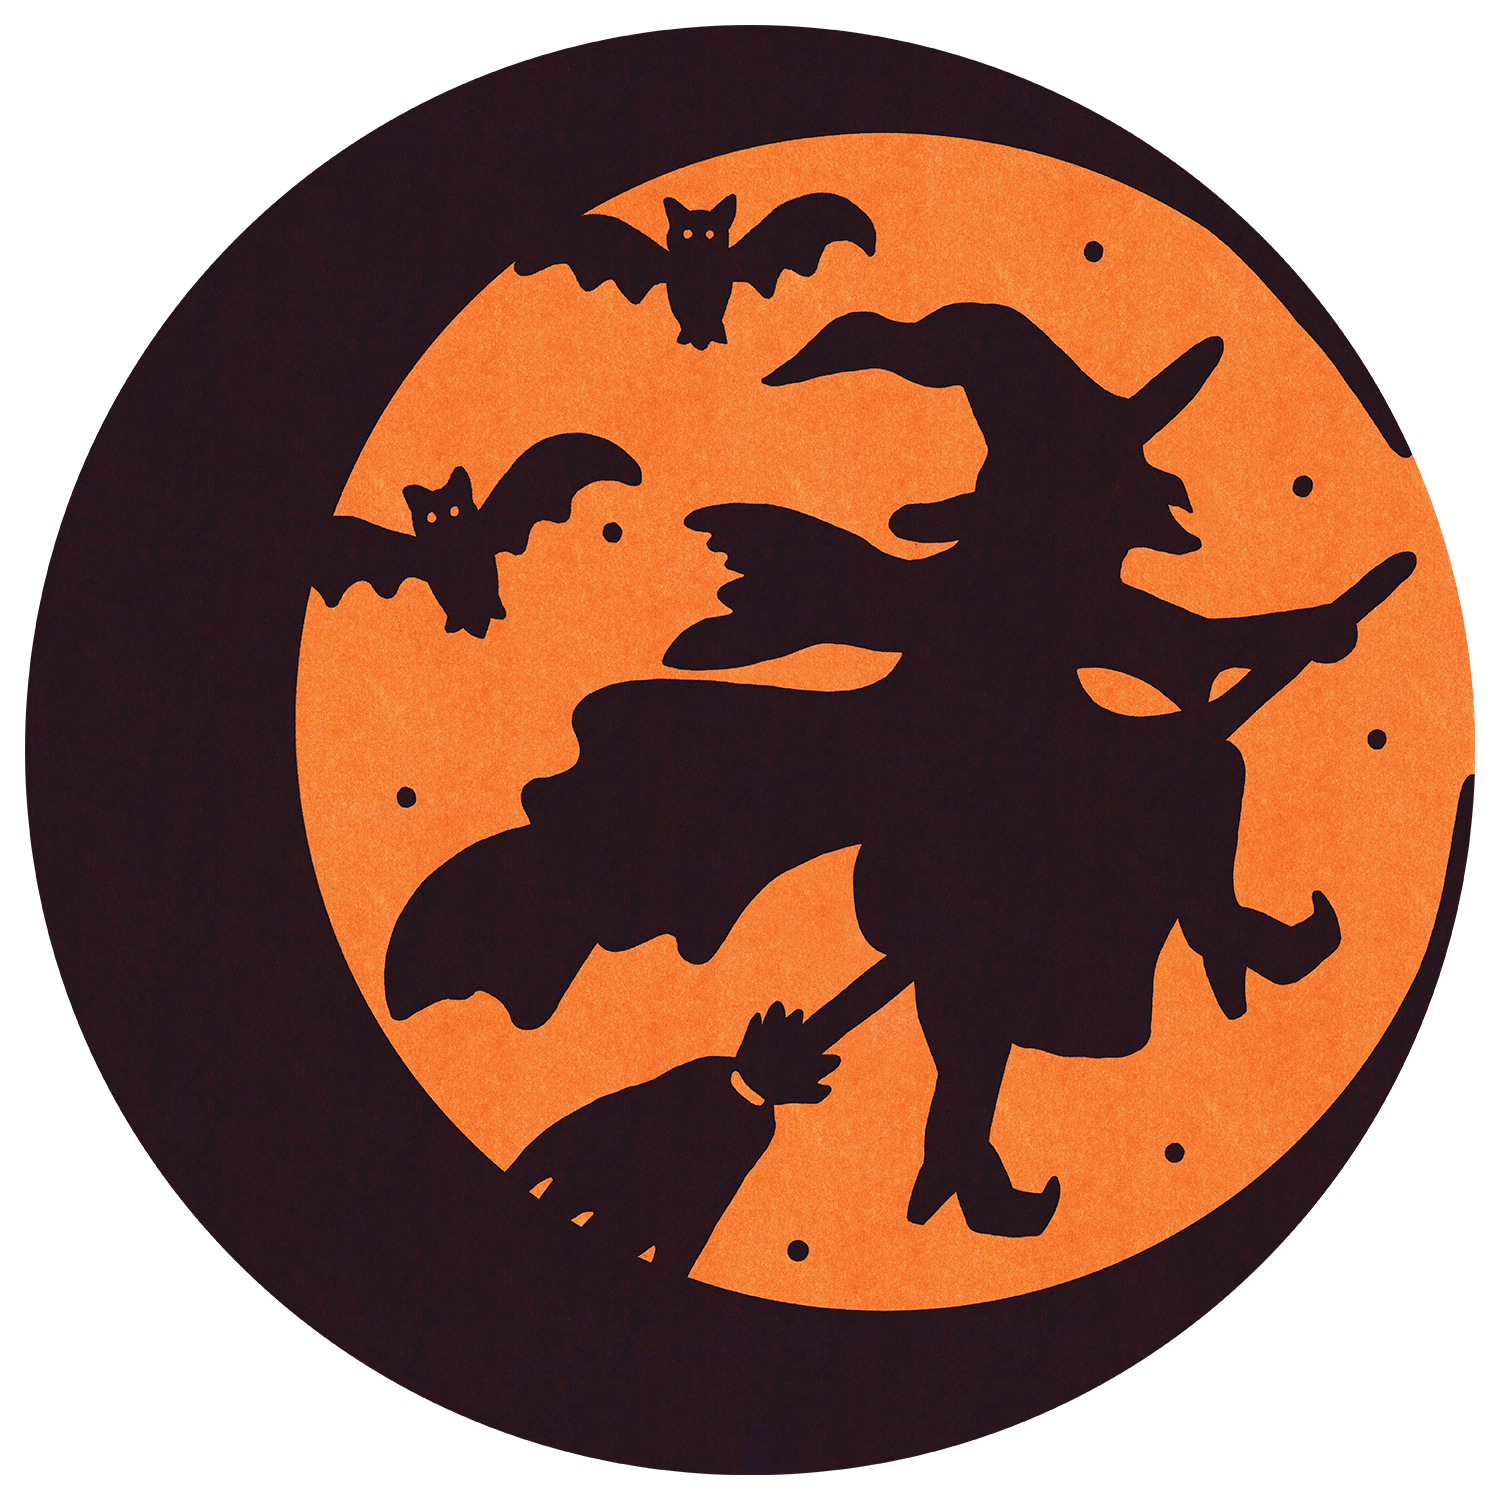 Die-cut placemat of a silhouette of a wicked witch on a broom, surrounded by bats, with an orange background and black crescent moon.